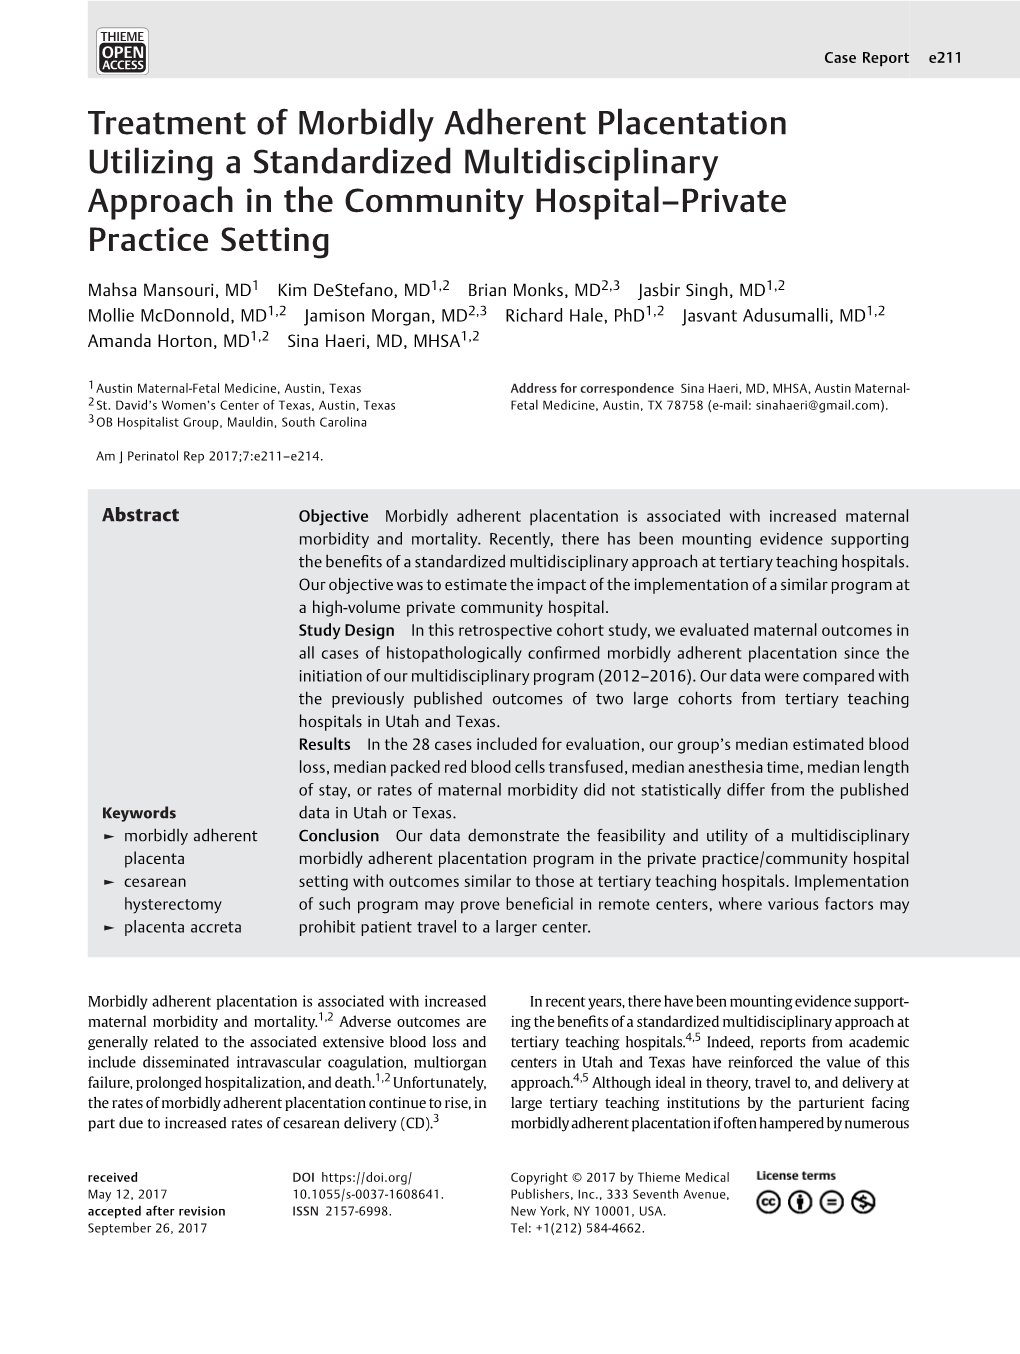 Treatment of Morbidly Adherent Placentation Utilizing a Standardized Multidisciplinary Approach in the Community Hospital–Private Practice Setting